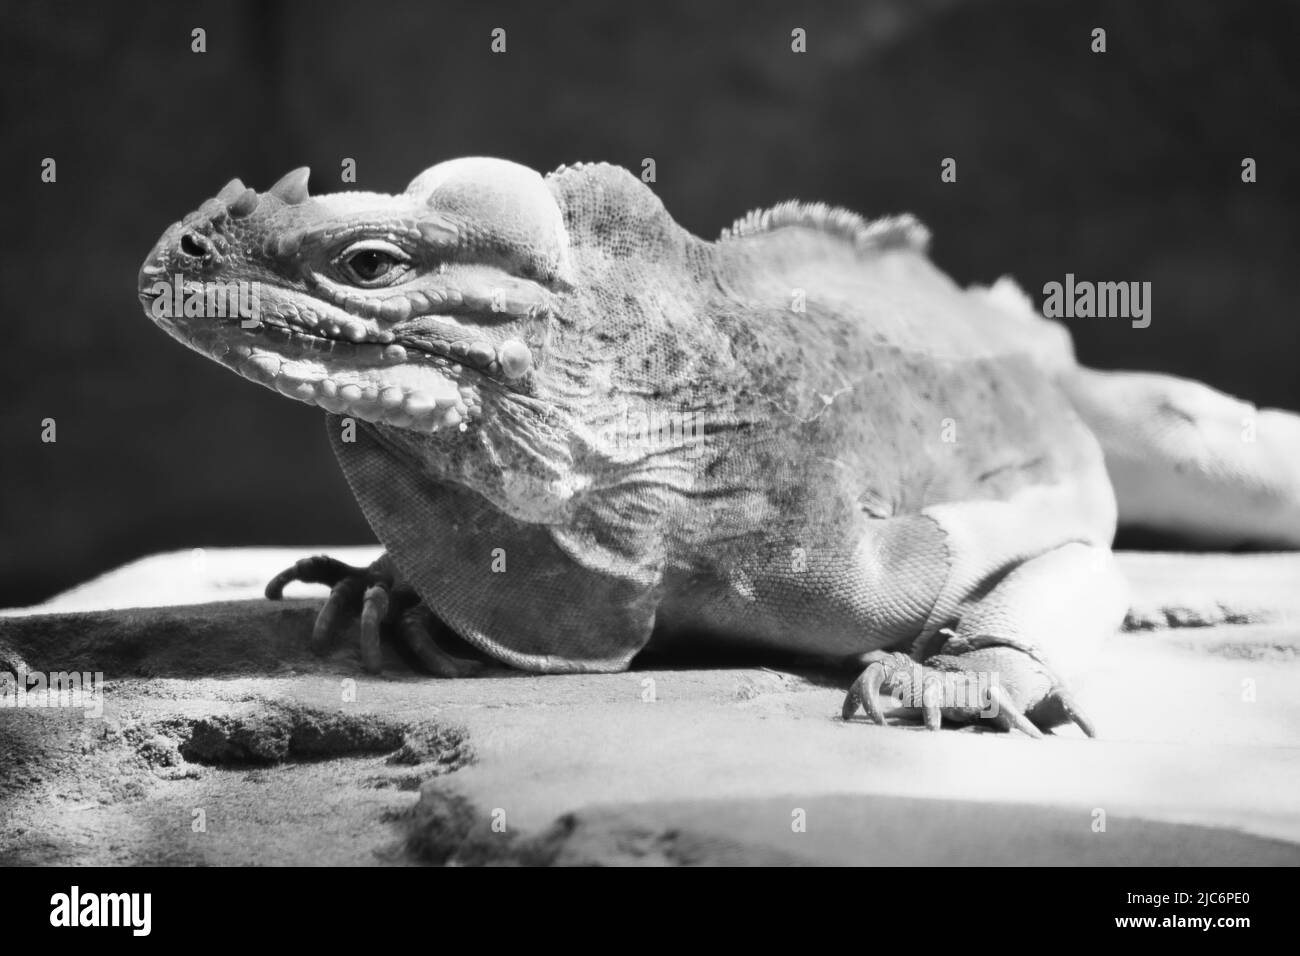 large iguana in black and white lying on a stone. Thorny comb and scaly skin. Animal photo of a reptile Stock Photo